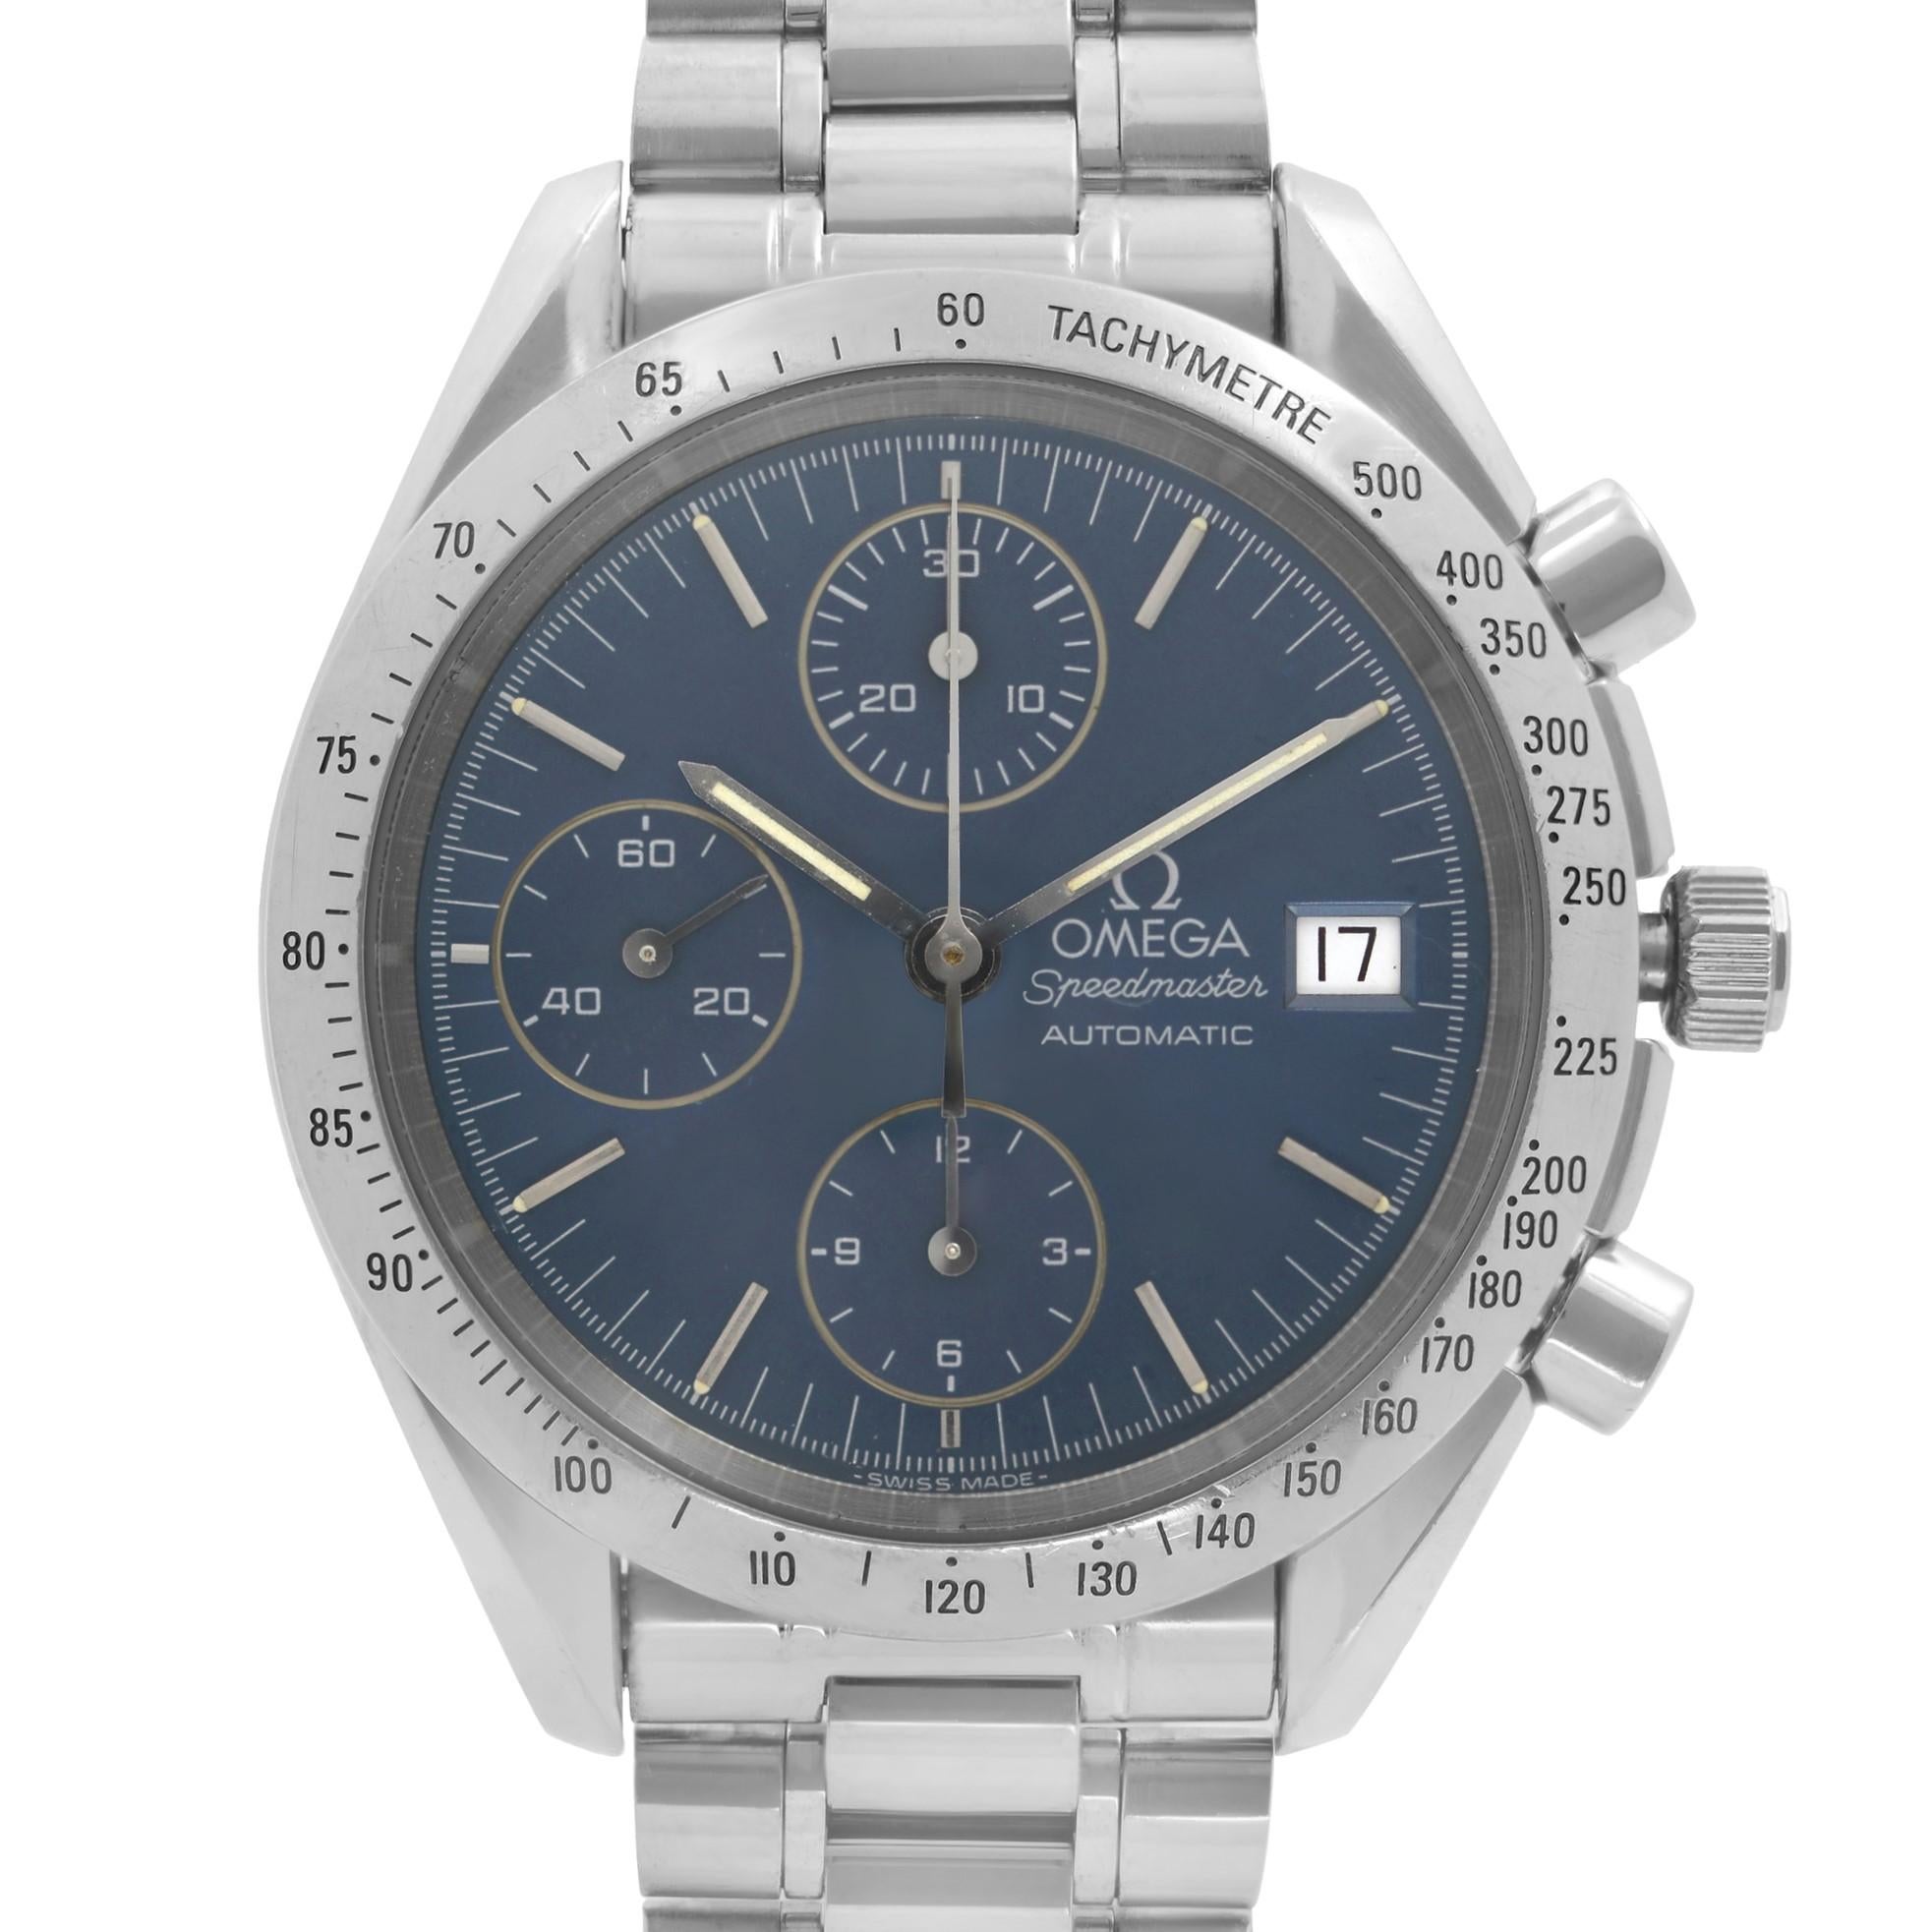 Pre-owned Omega Speedmaster Chronograph Steel Blue Dial Automatic Men's Watch 3511.80.00. Minor Dirt Sign-on hand due to age. No Original Box and Papers are Included. Comes with Chronostore Presentation Box and Authenticity Card. Covered by 1-year